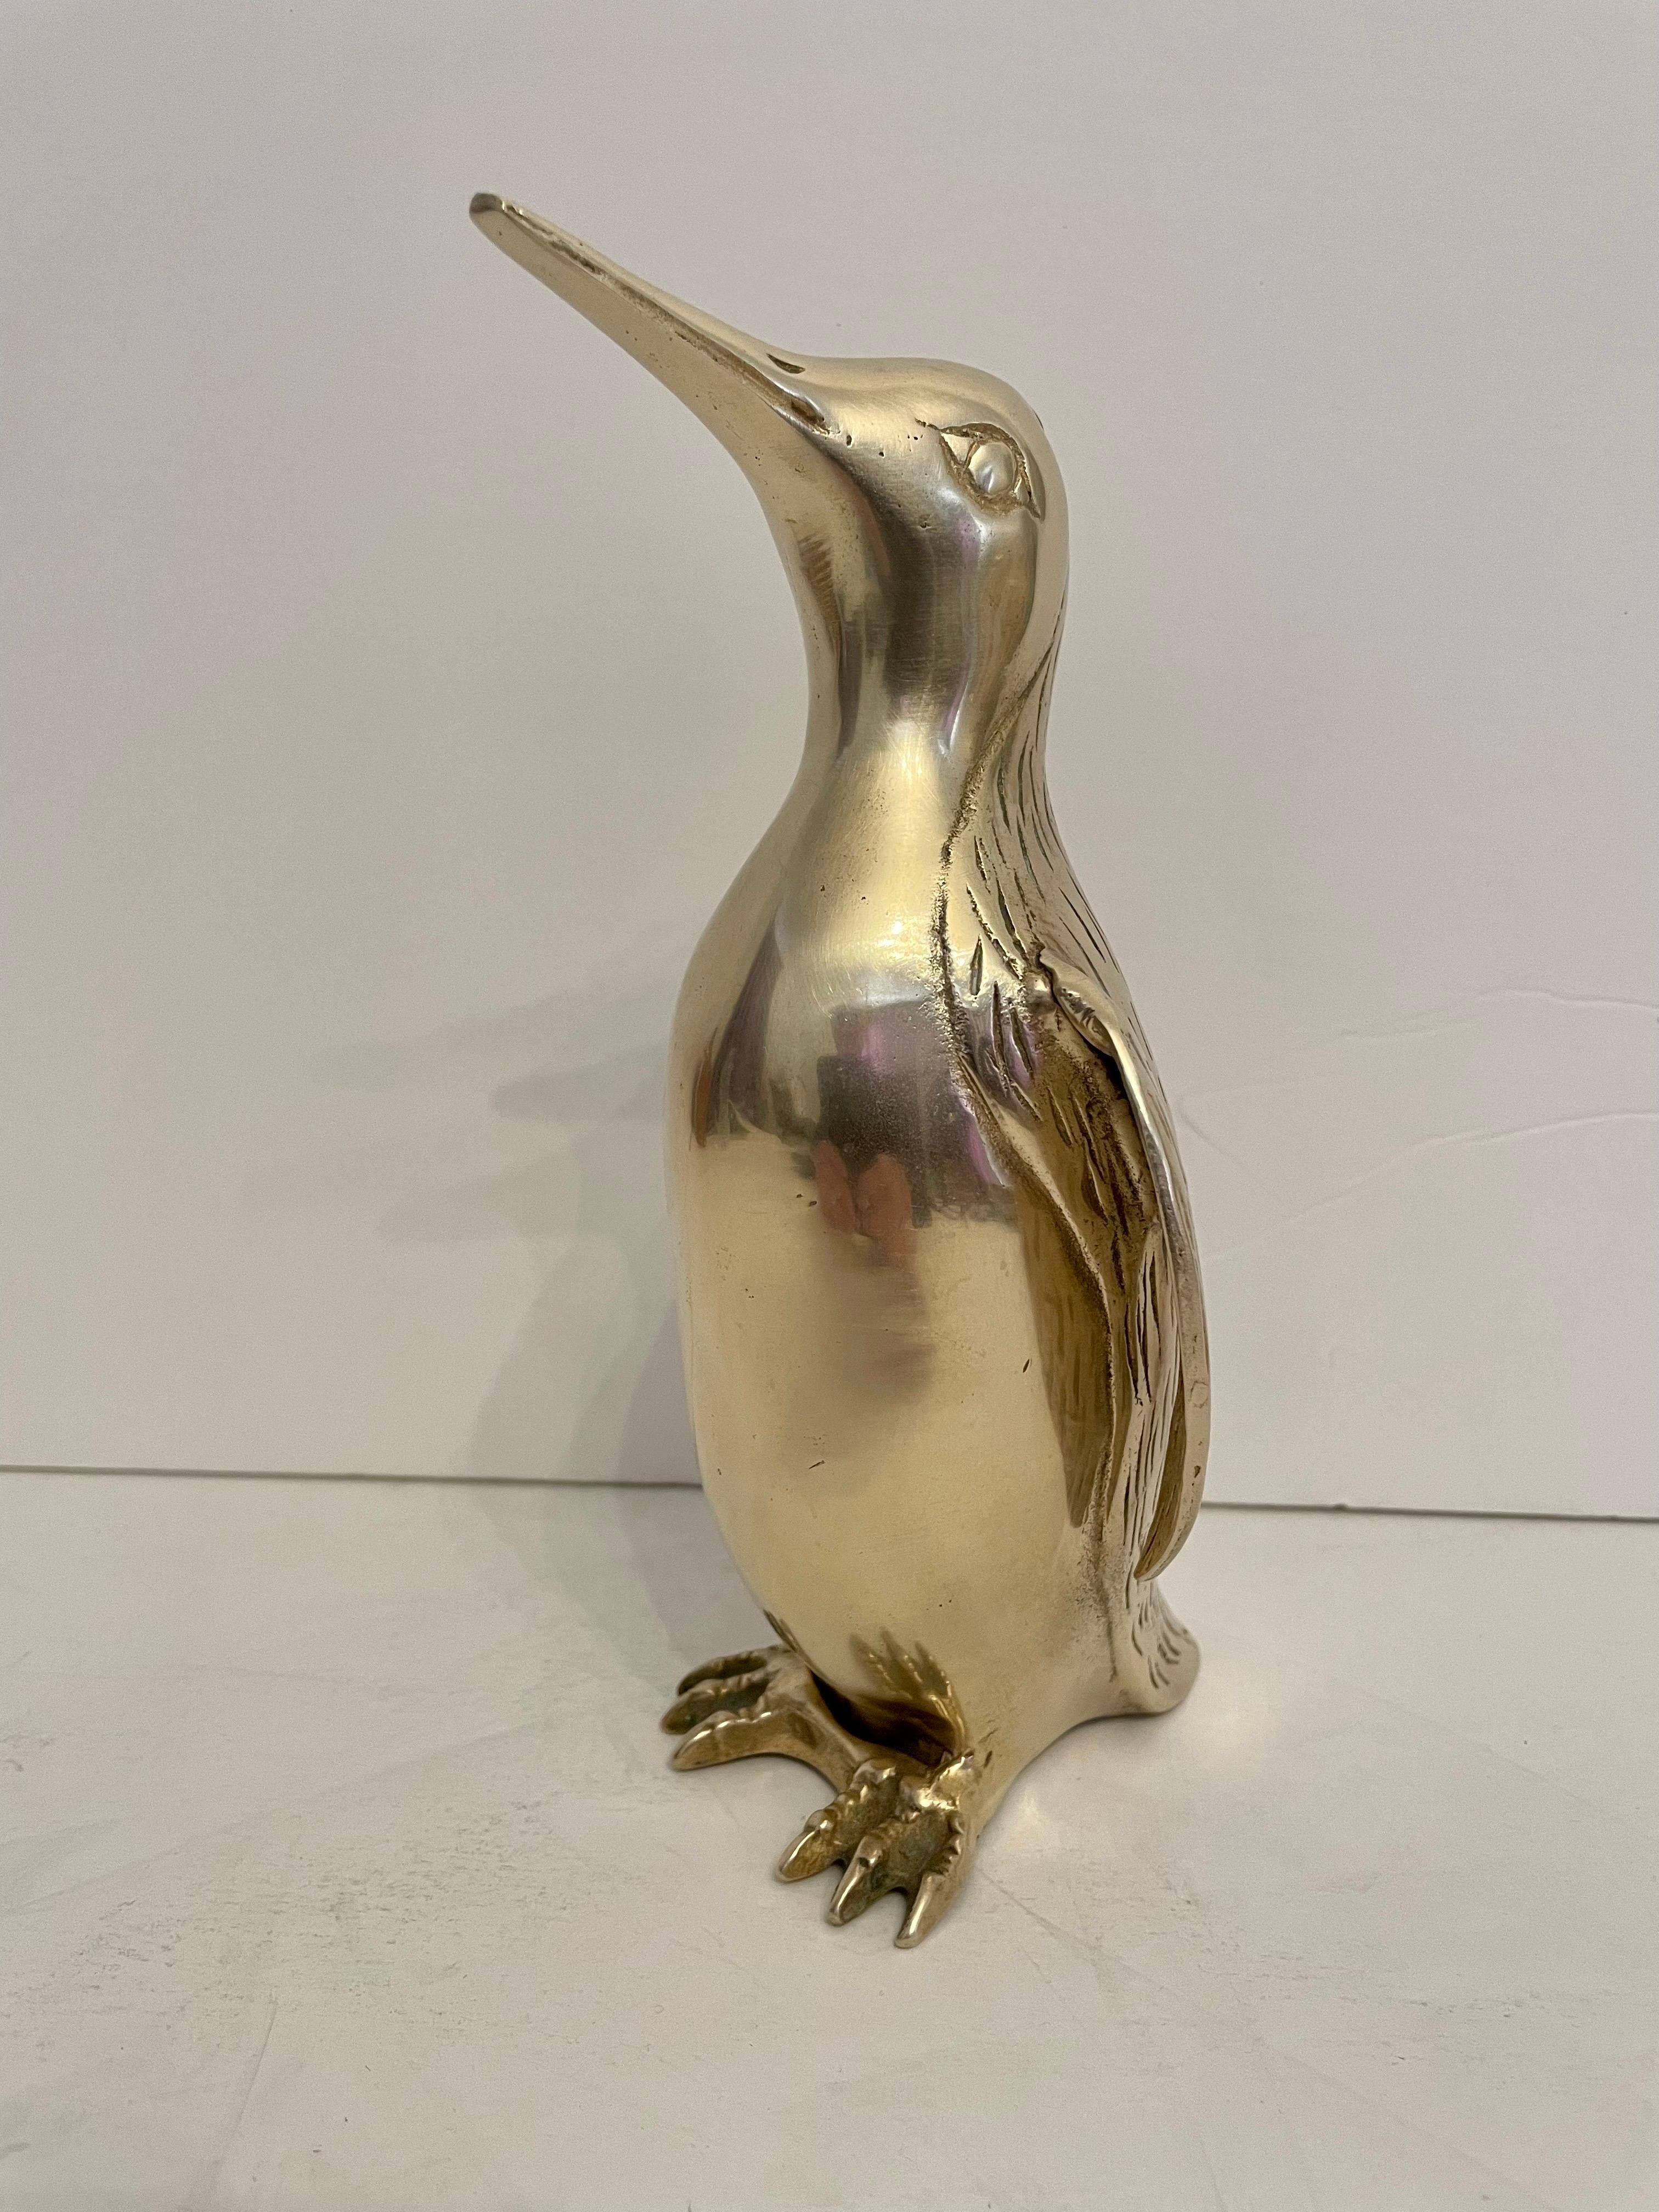 Vintage Hollywood Regency brass Penguin sculpture. Nicely detailed. Hand polished. Good overall condition. Dark and light spots are reflection of light in photos. Measures 8” tall x 4.25” wide x 4.25” deep. Remnant of Korea stick on underside. QUICK